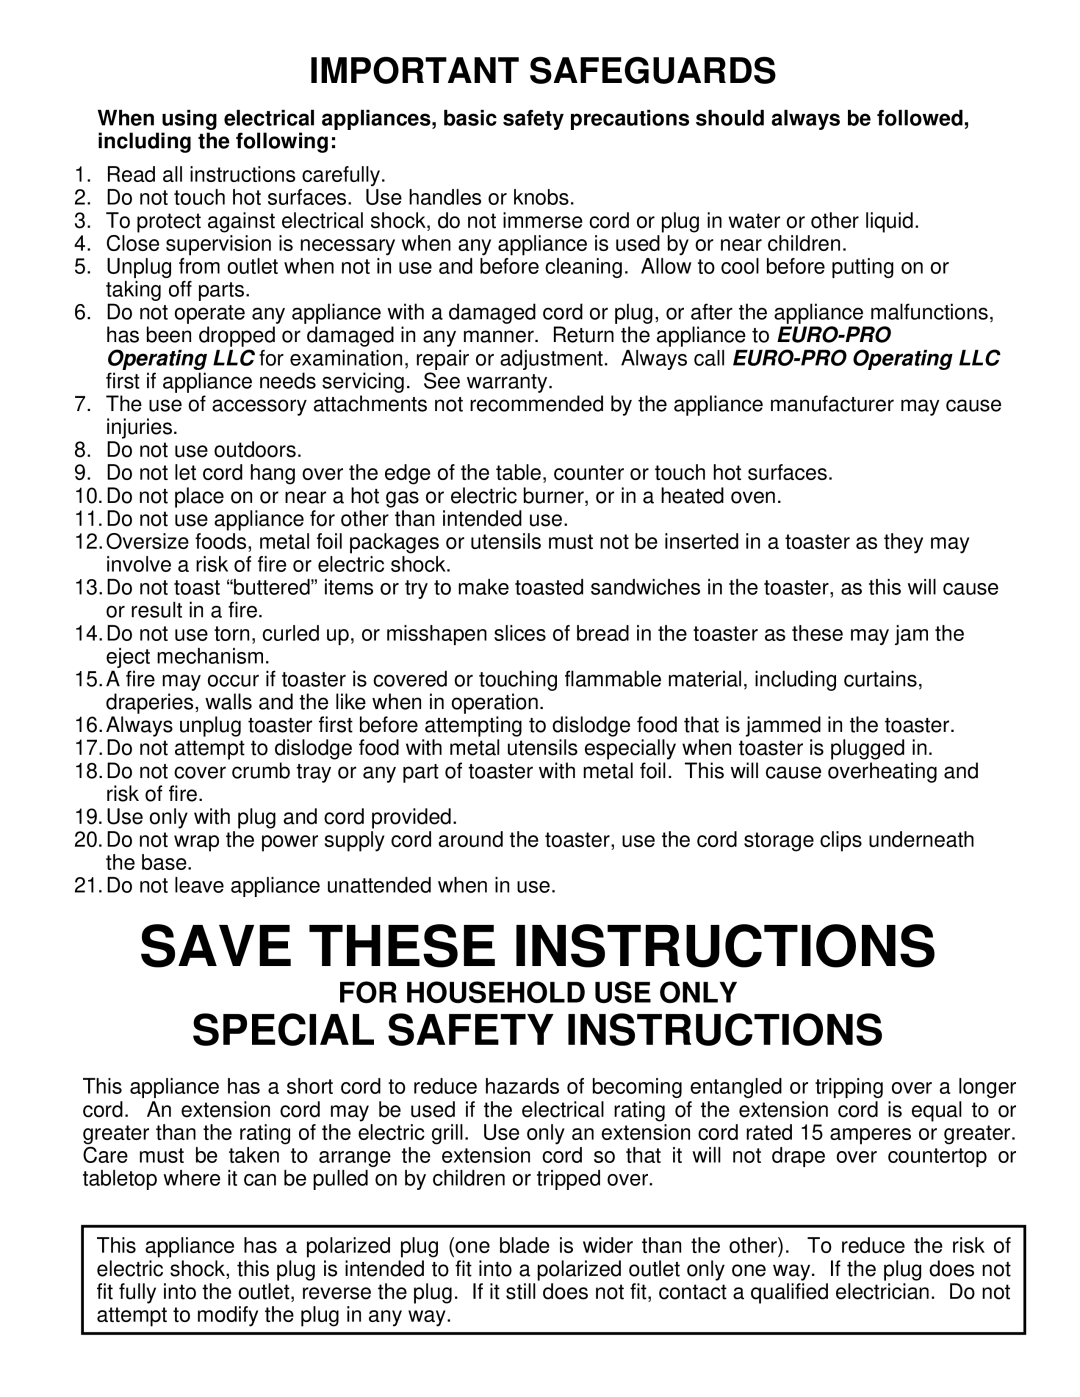 Euro-Pro EP325 warranty Special Safety Instructions, Important Safeguards, For Household Use Only, Save These Instructions 